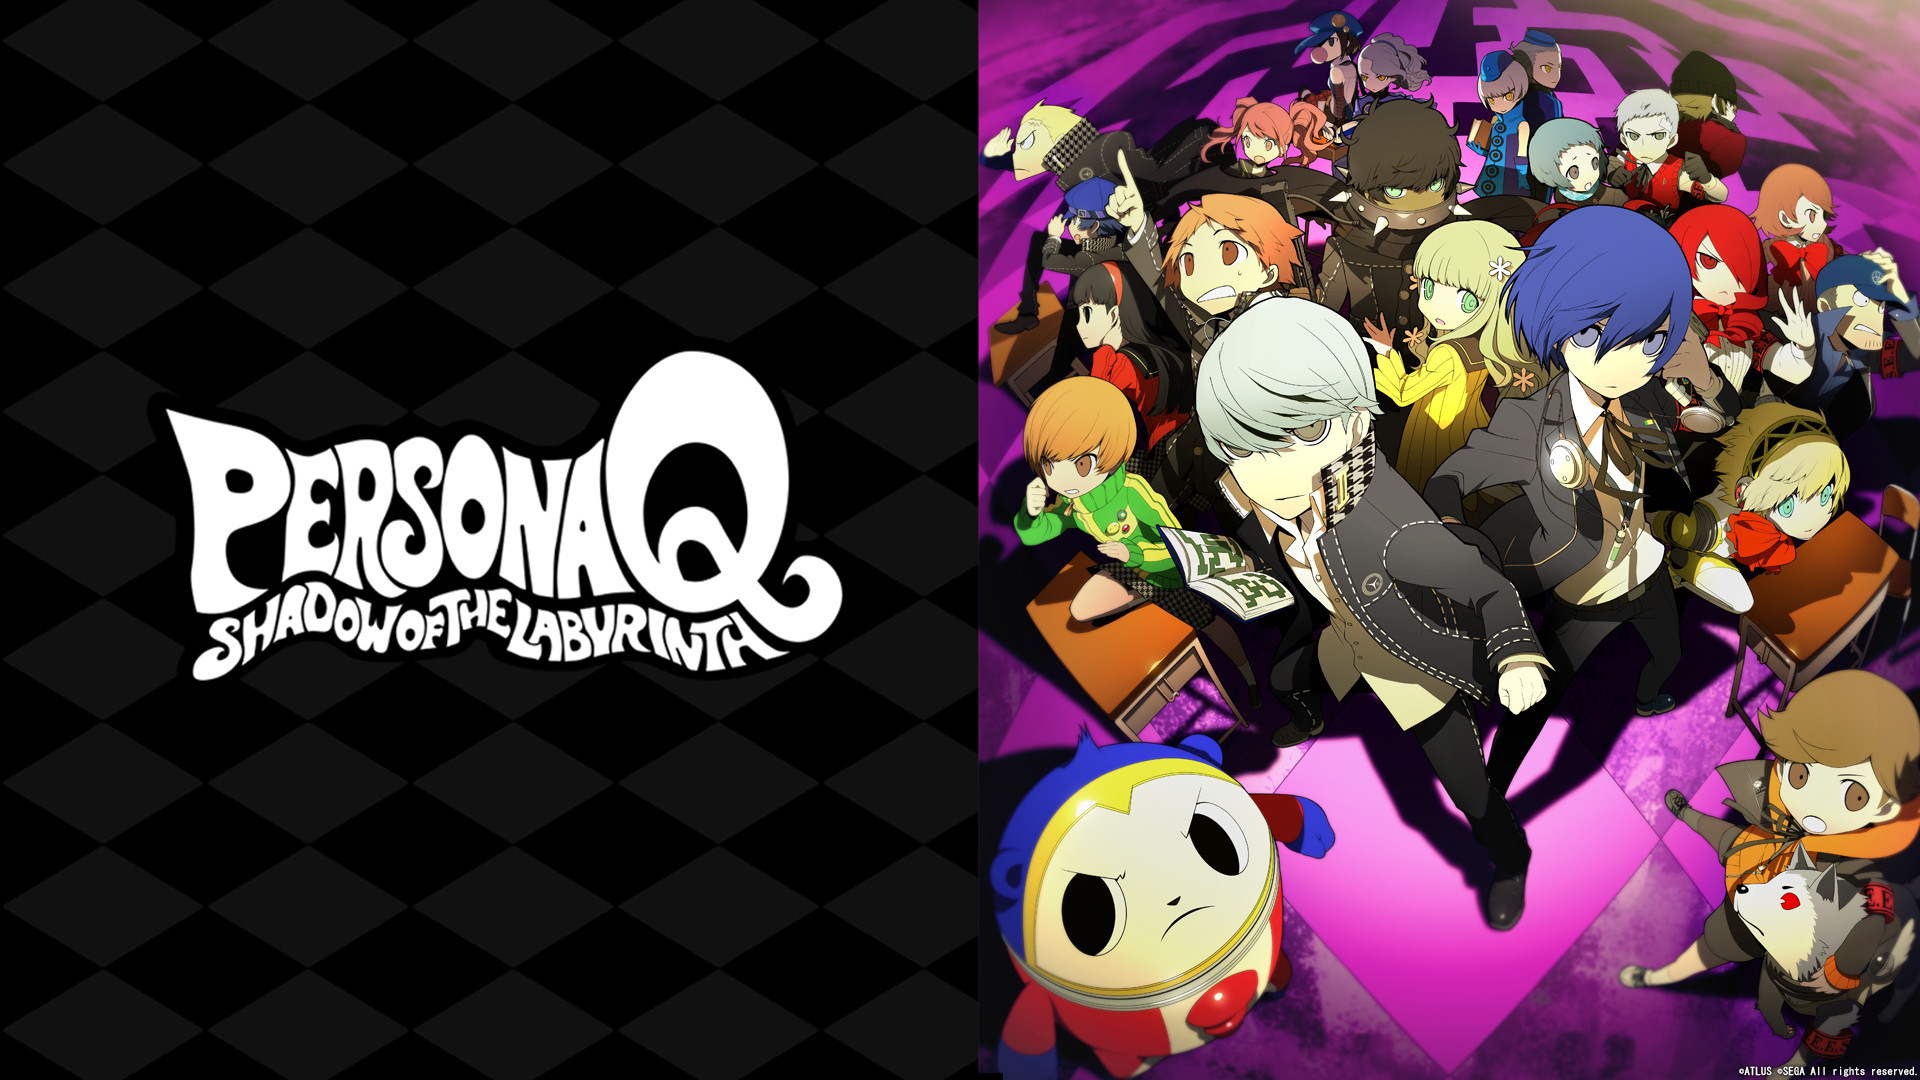 1920x1080 ... download Persona Q: Shadow Of The Labyrinth image